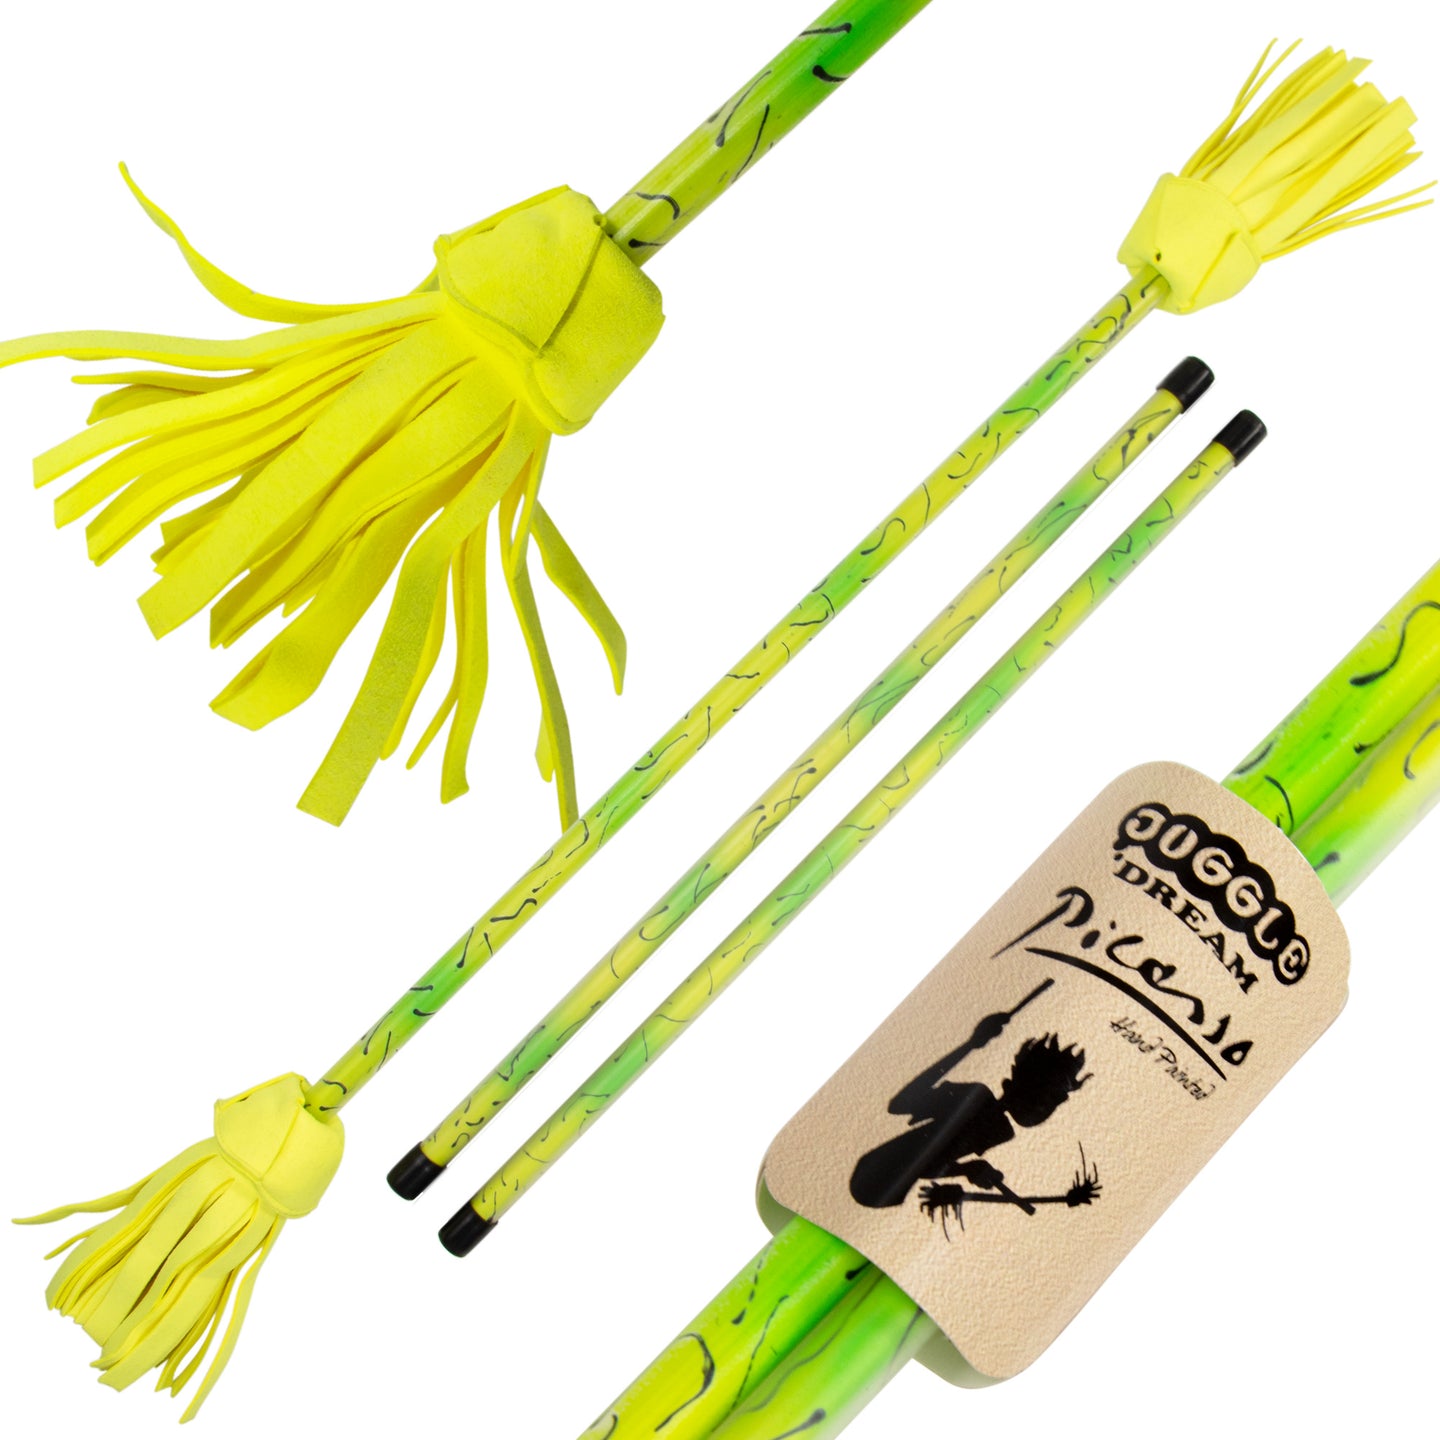 Yellow/ Green full size Picasso Flower Stick with Handsticks with close-up of label and tassels